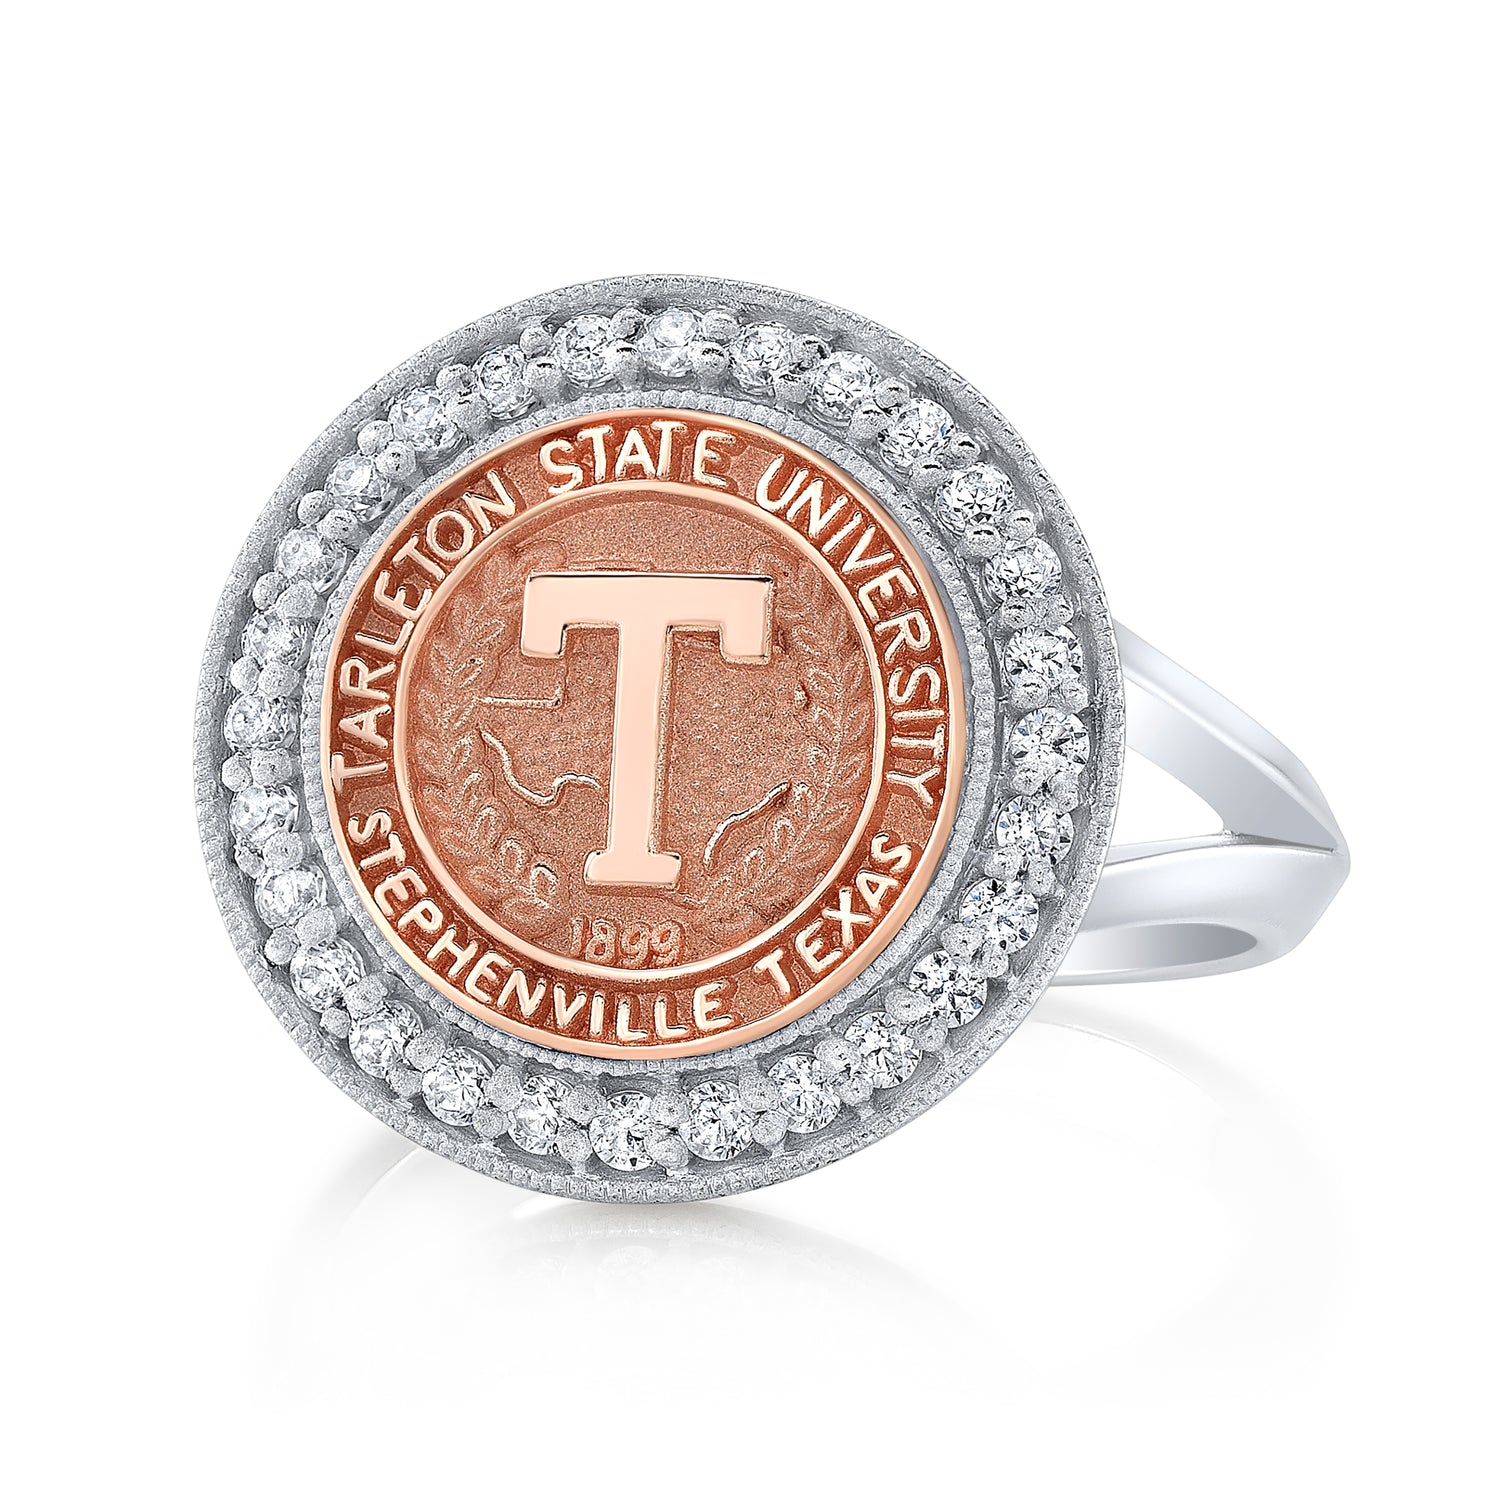 the Pursuit 234 university collection ring by San Jose Jewelers in 12 mm. 